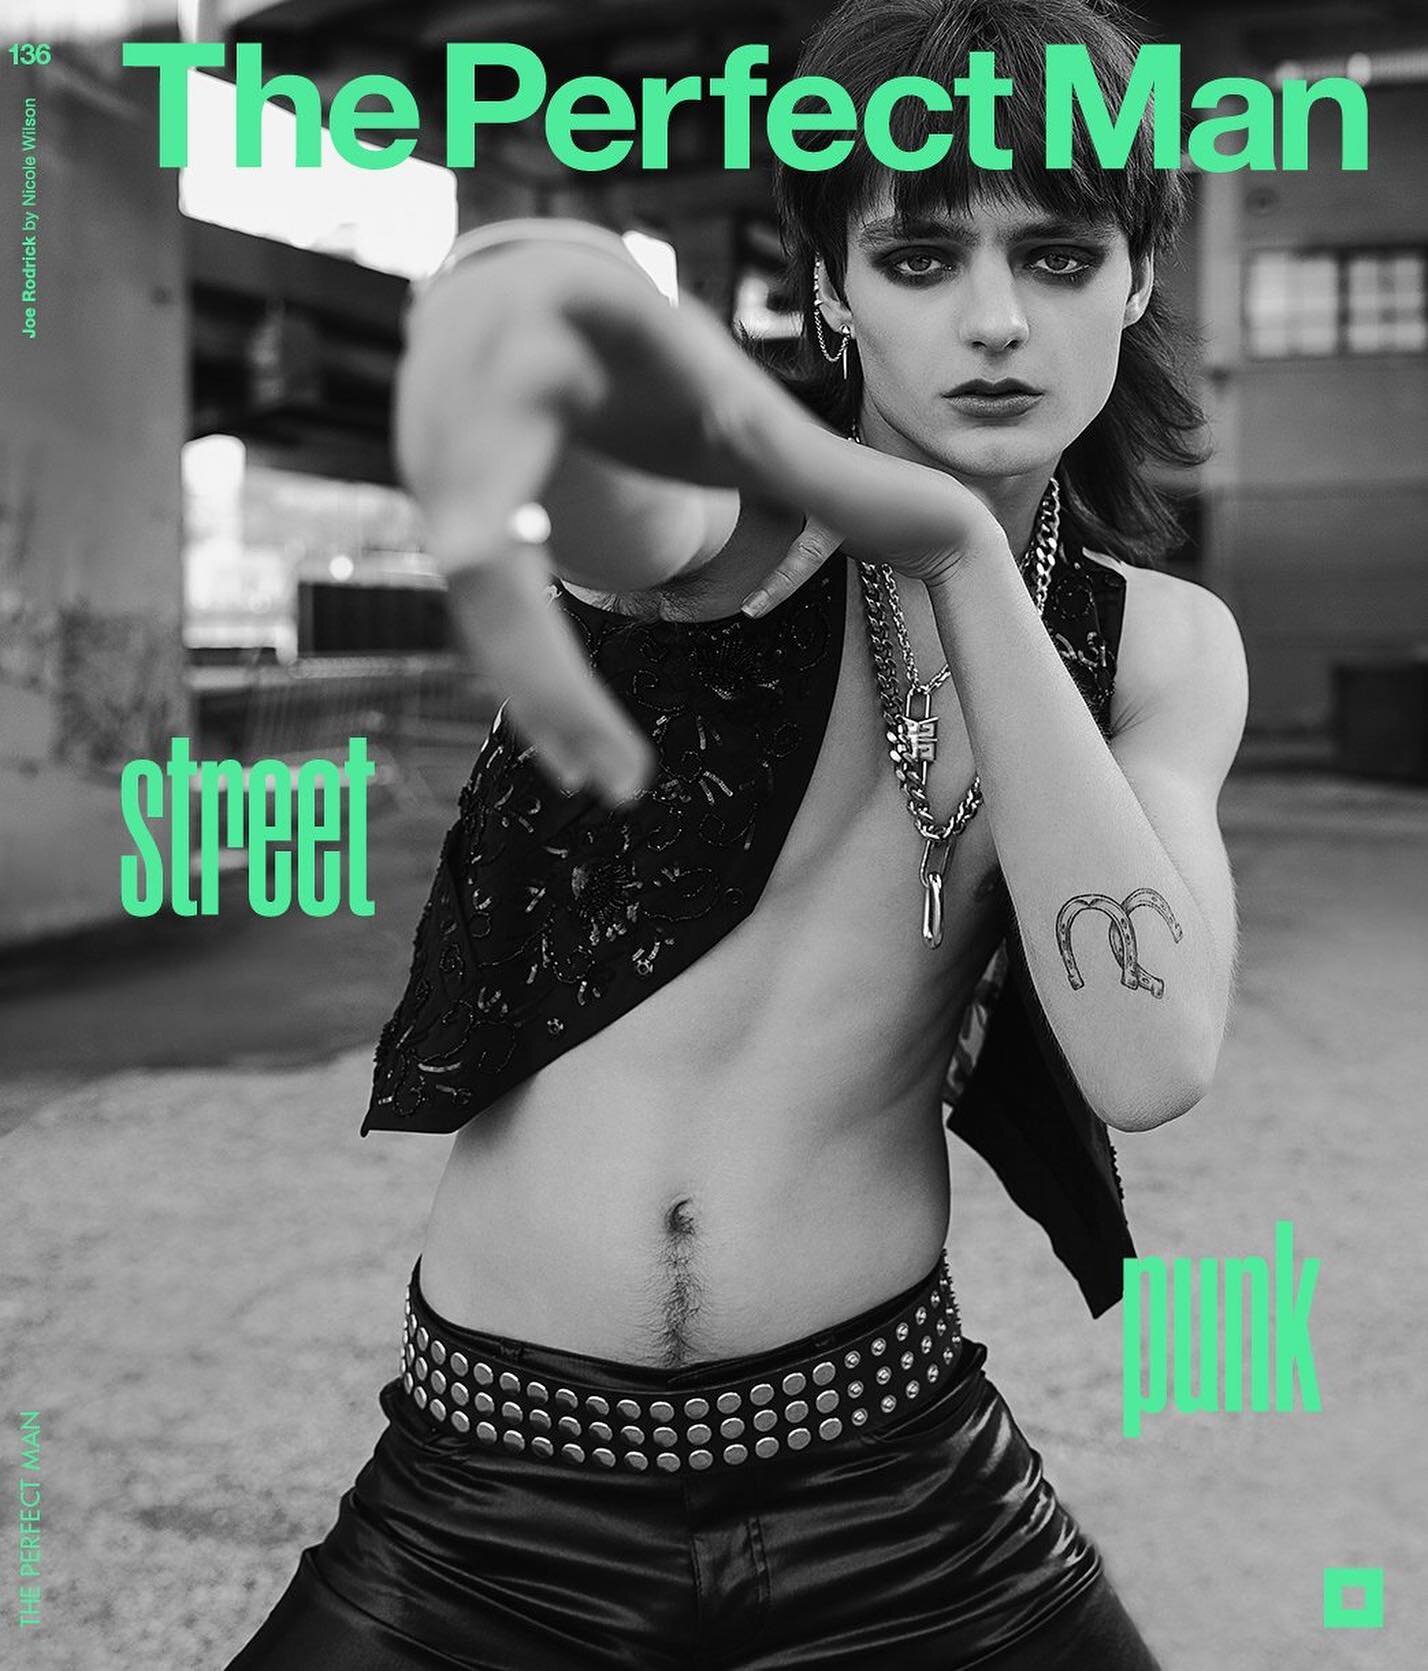 Street Punk: Street punk style is bold and rebellious this Spring, with its distinctive mix of punk and the gender fluidity of the time. Featuring model Joe Rodrick @Urb4nc0wboy in the much timely @chanel and much more.
&mdash;
Photography @nicolemil